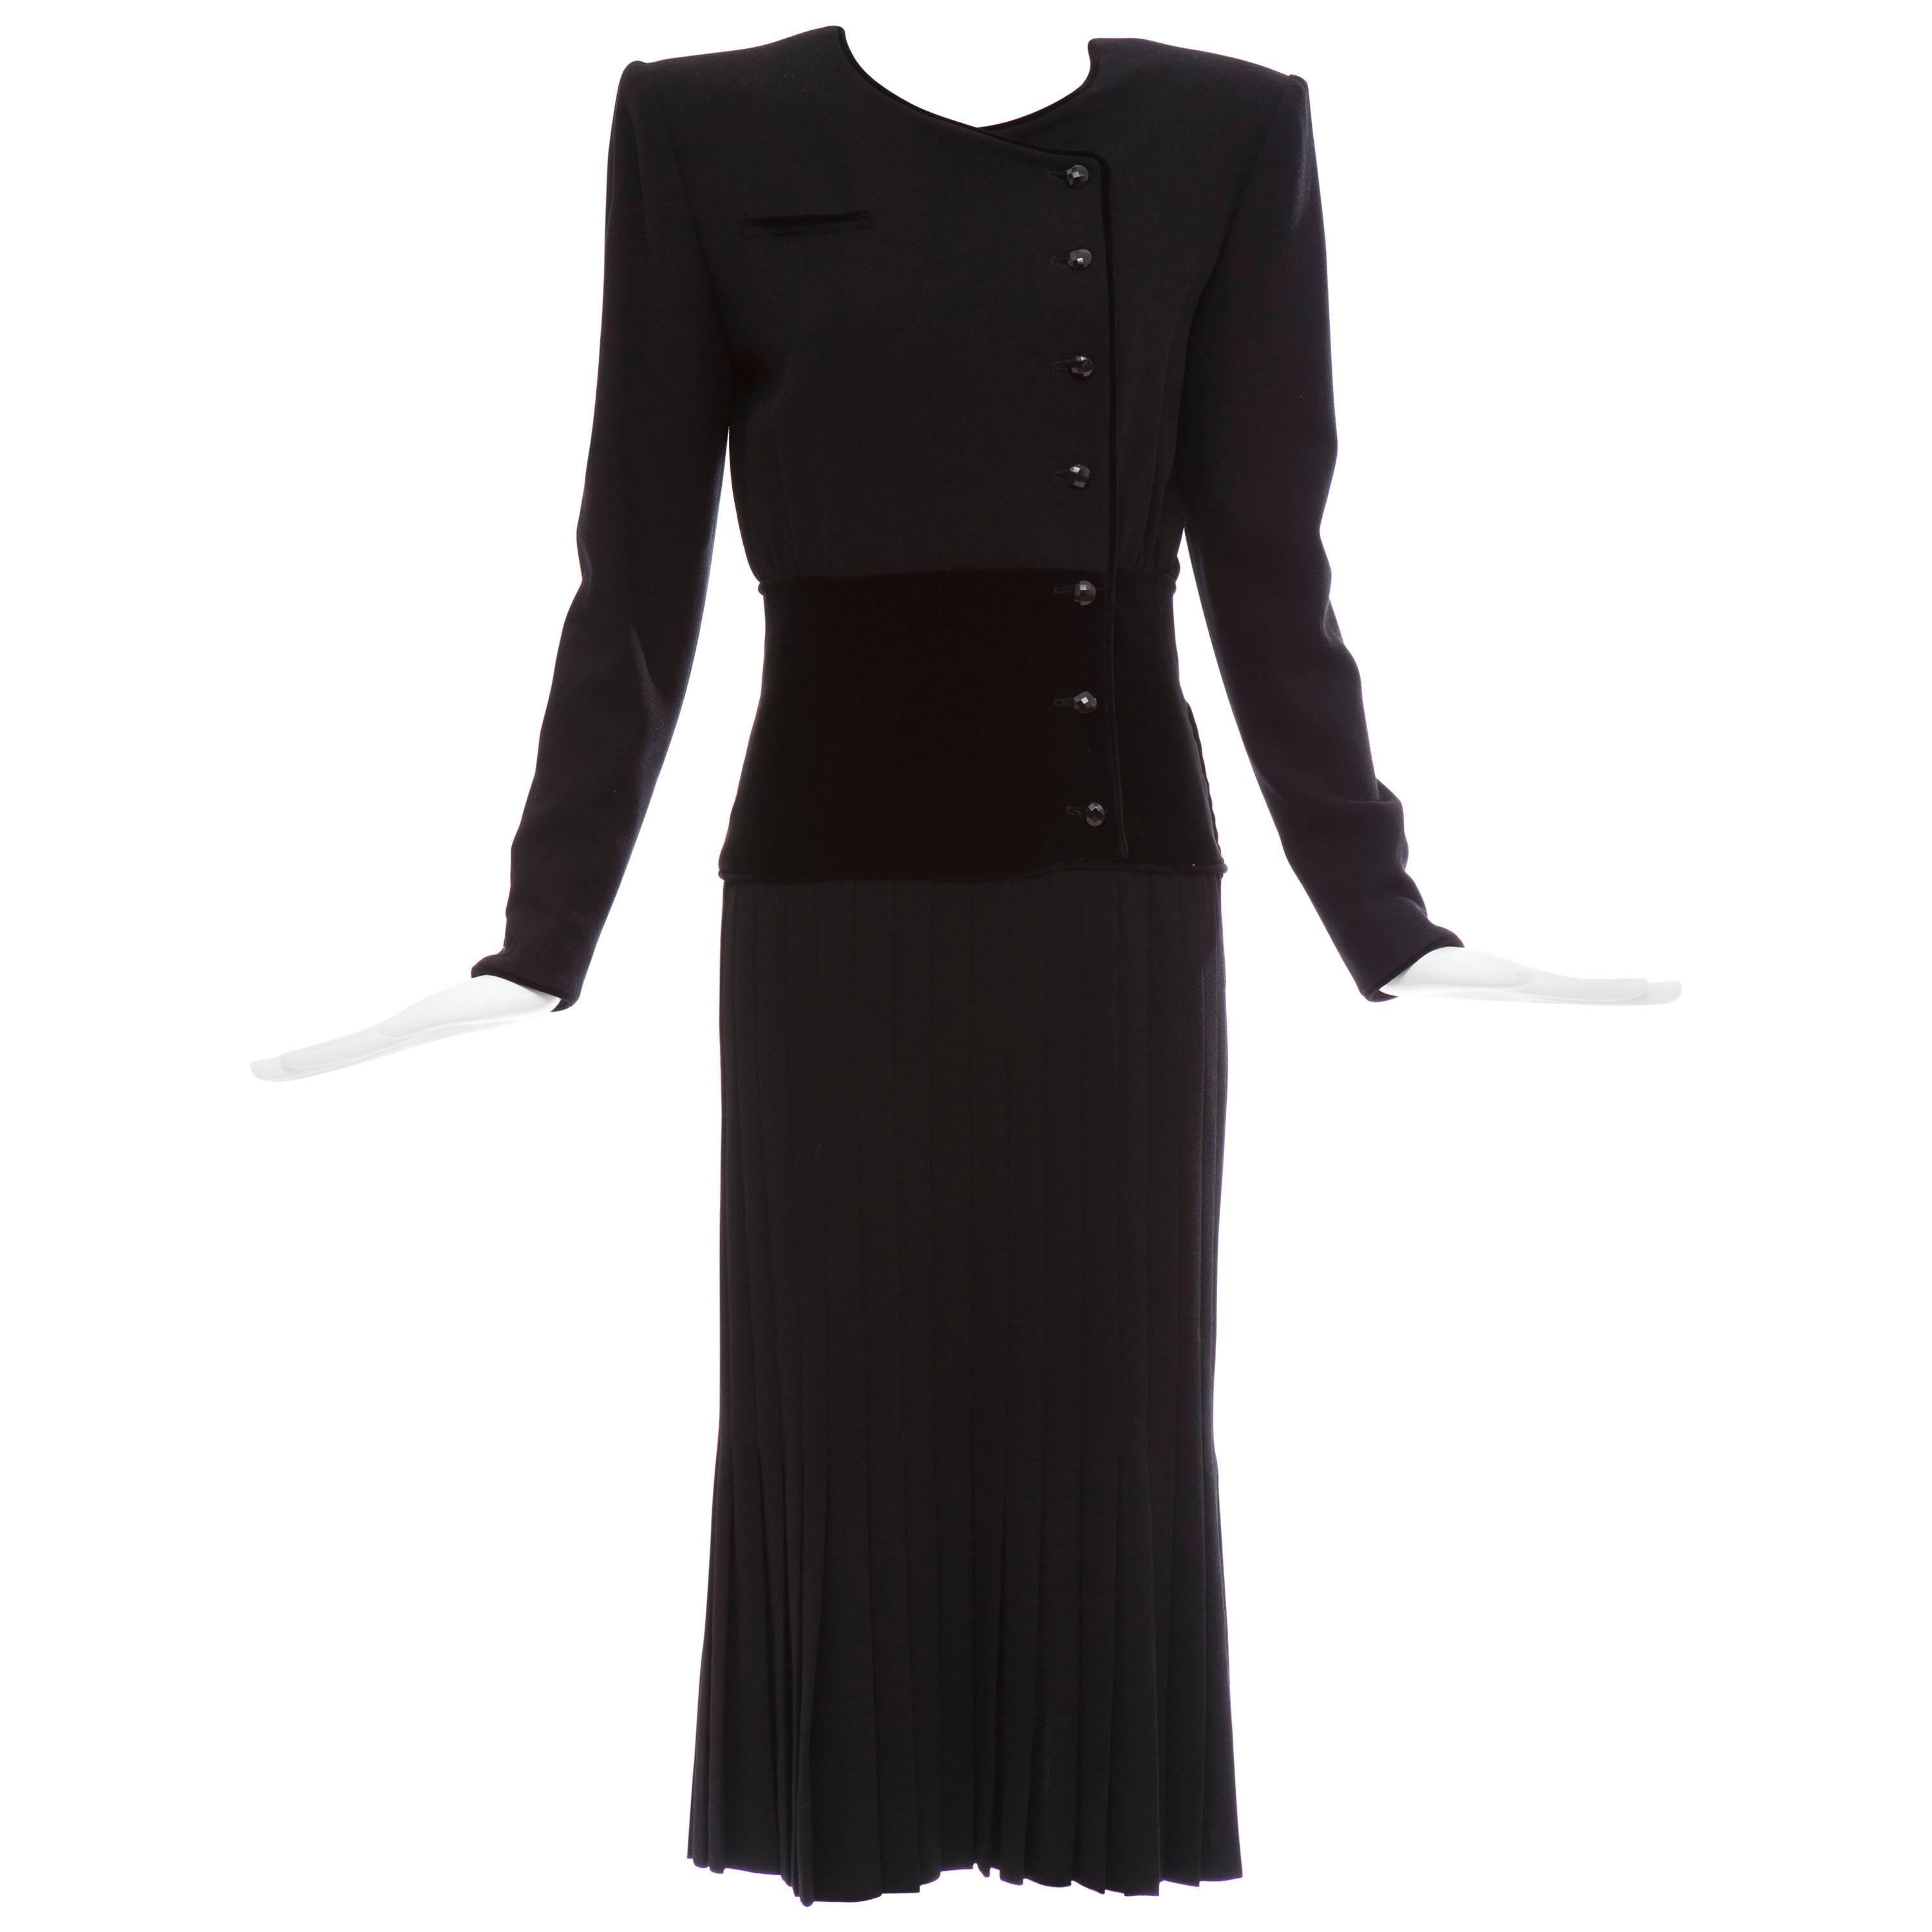 Valentino Black Wool Crepe And Velvet Evening Dress, Circa 1980's For Sale